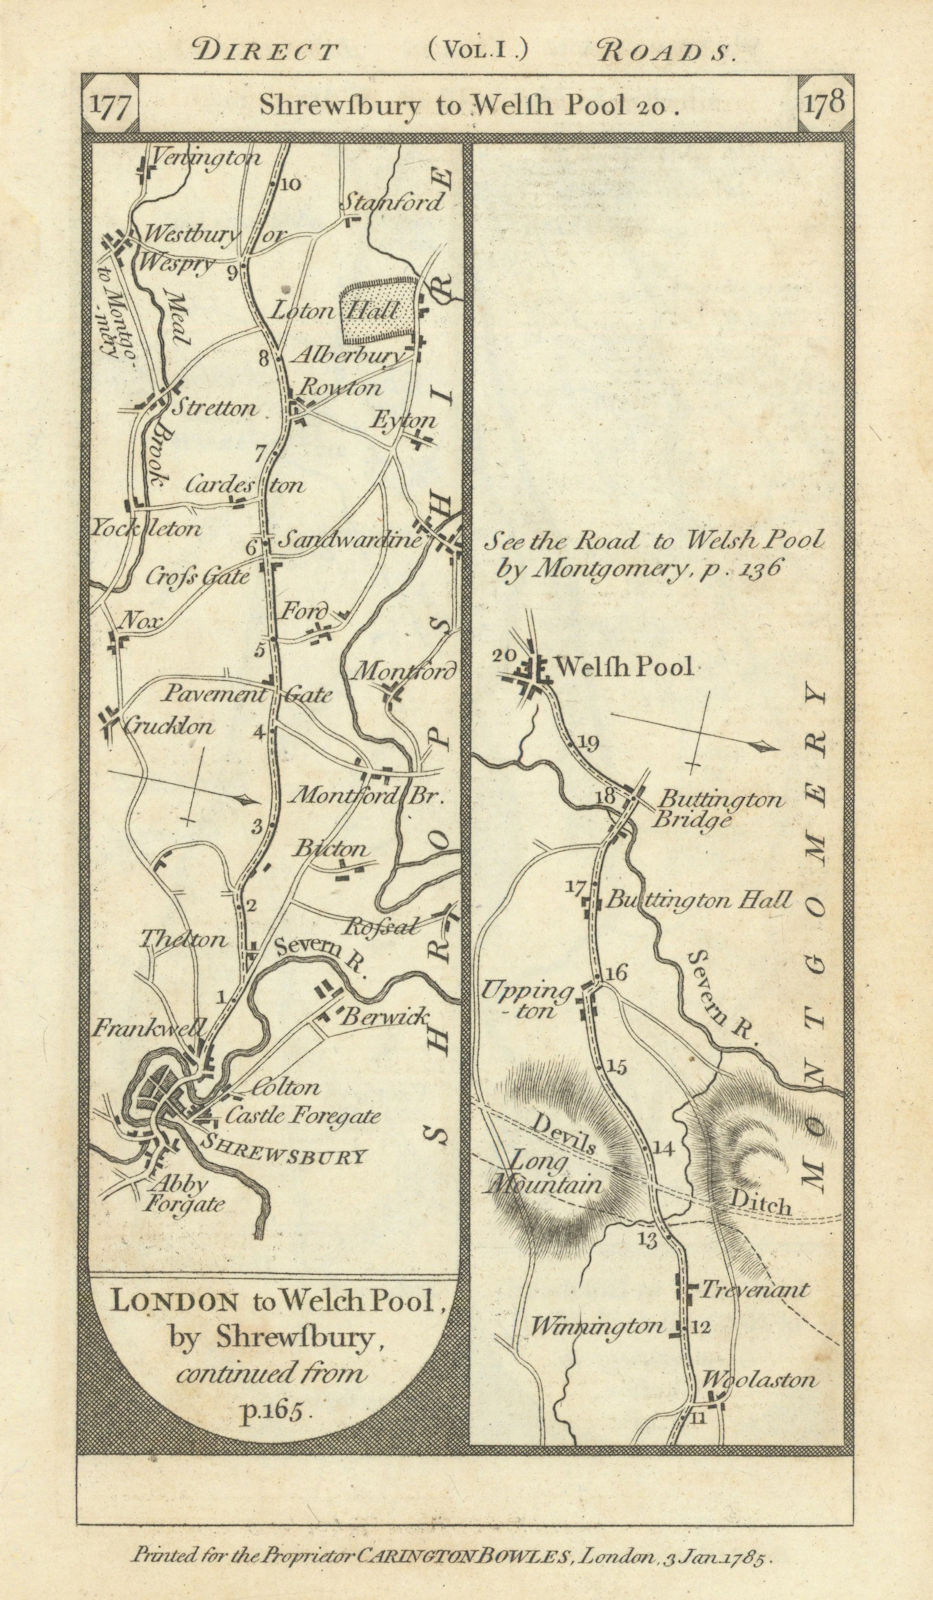 Associate Product Shrewsbury - Westbury - Weslhpool road strip map PATERSON 1785 old antique